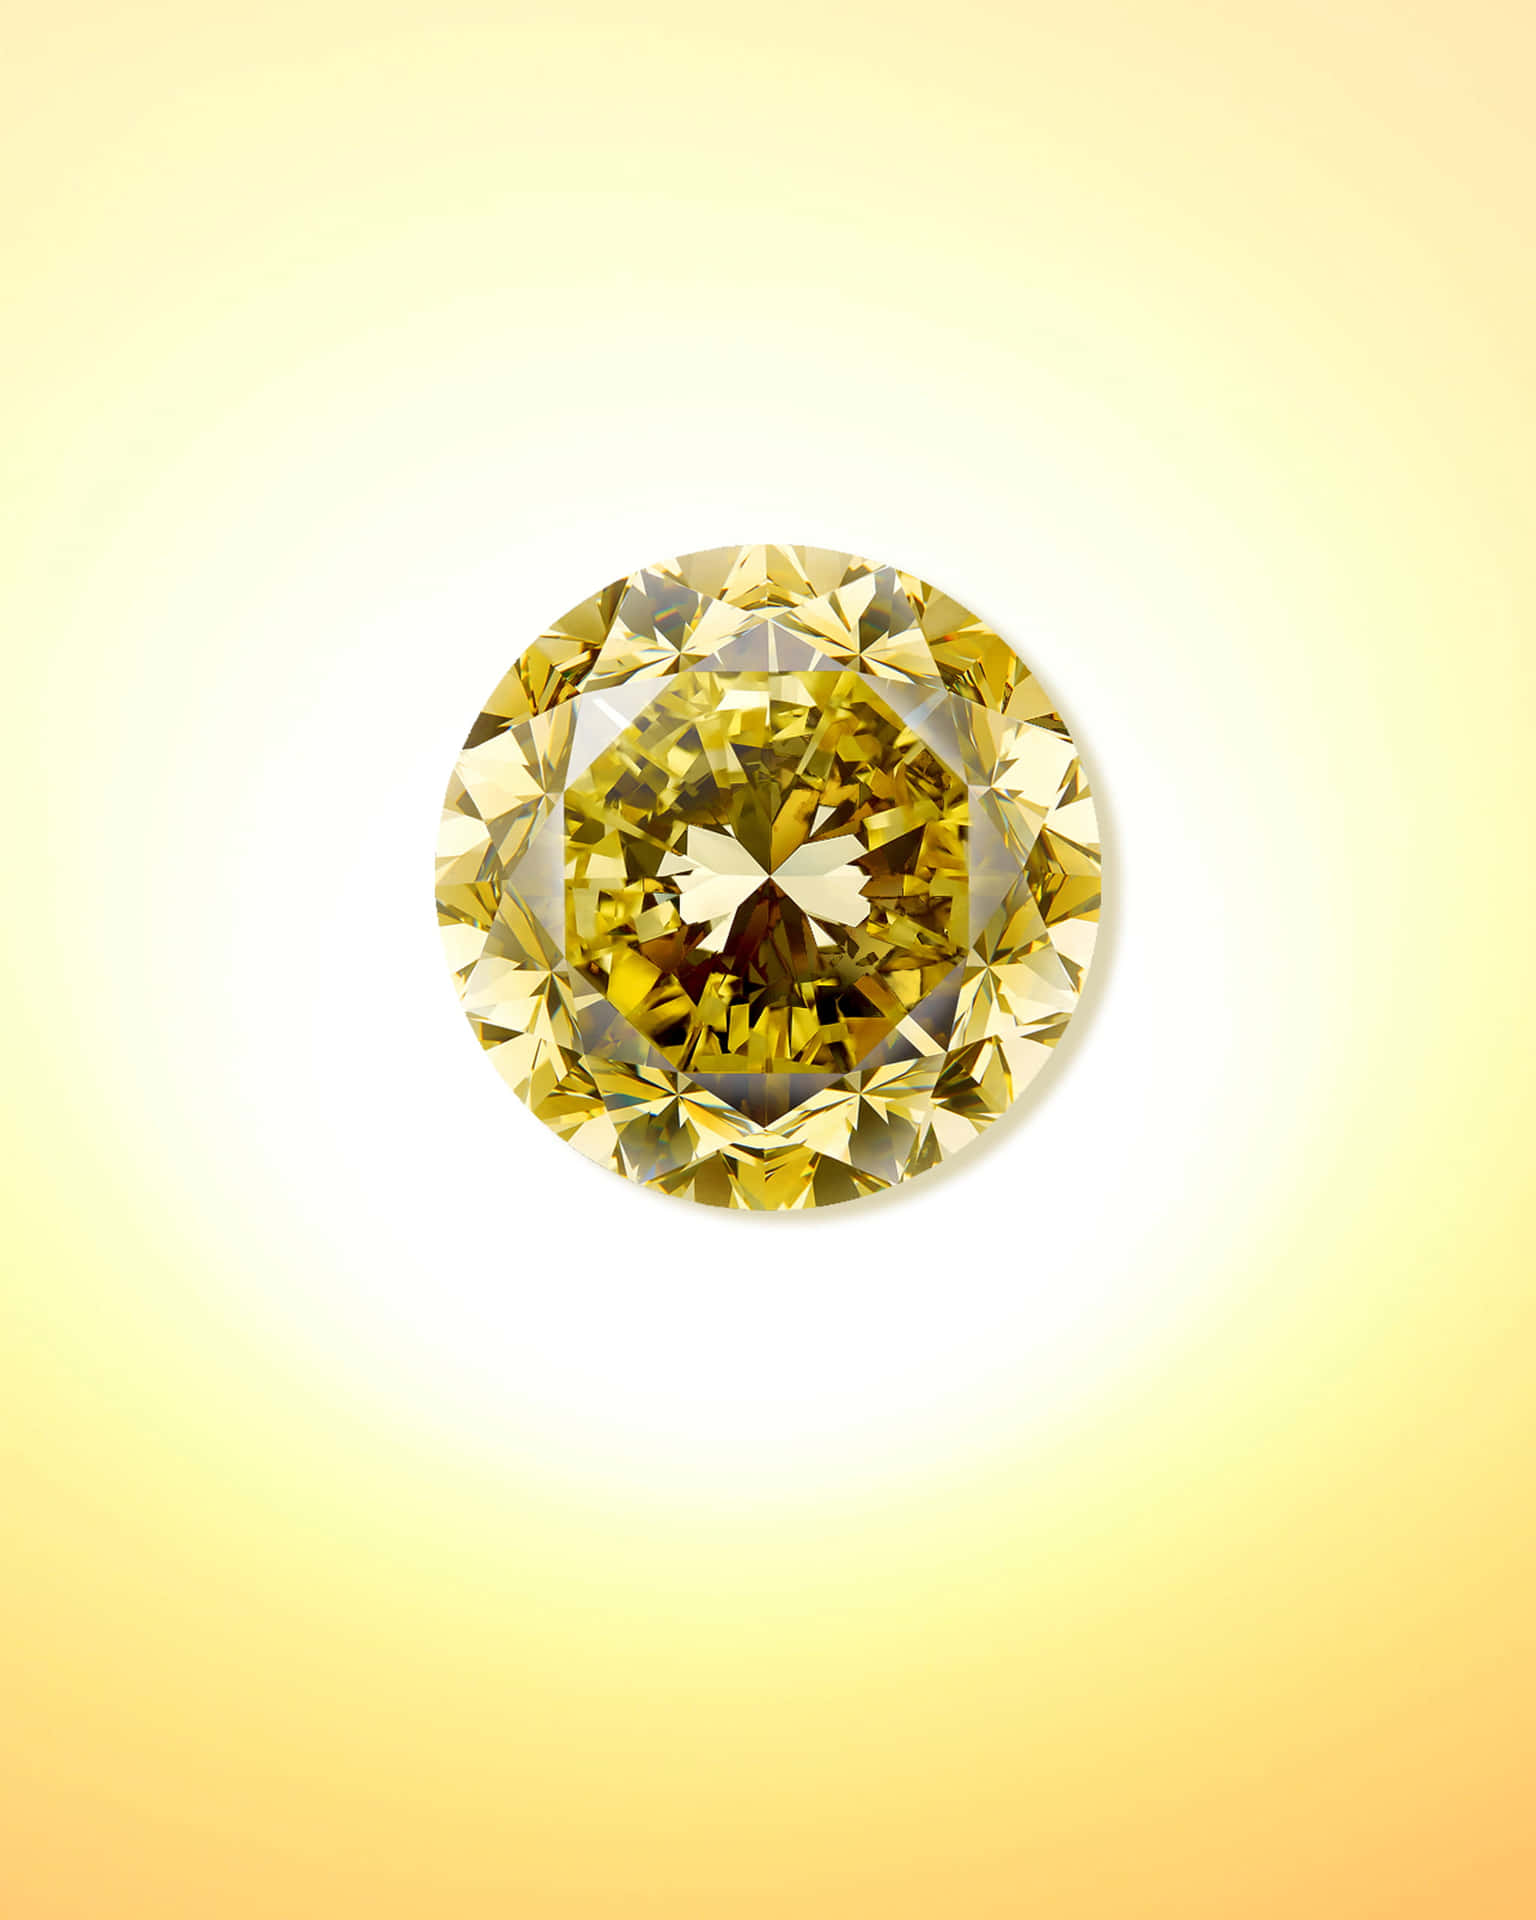 A stunning and luxurious yellow diamond shining brightly against a dark background Wallpaper